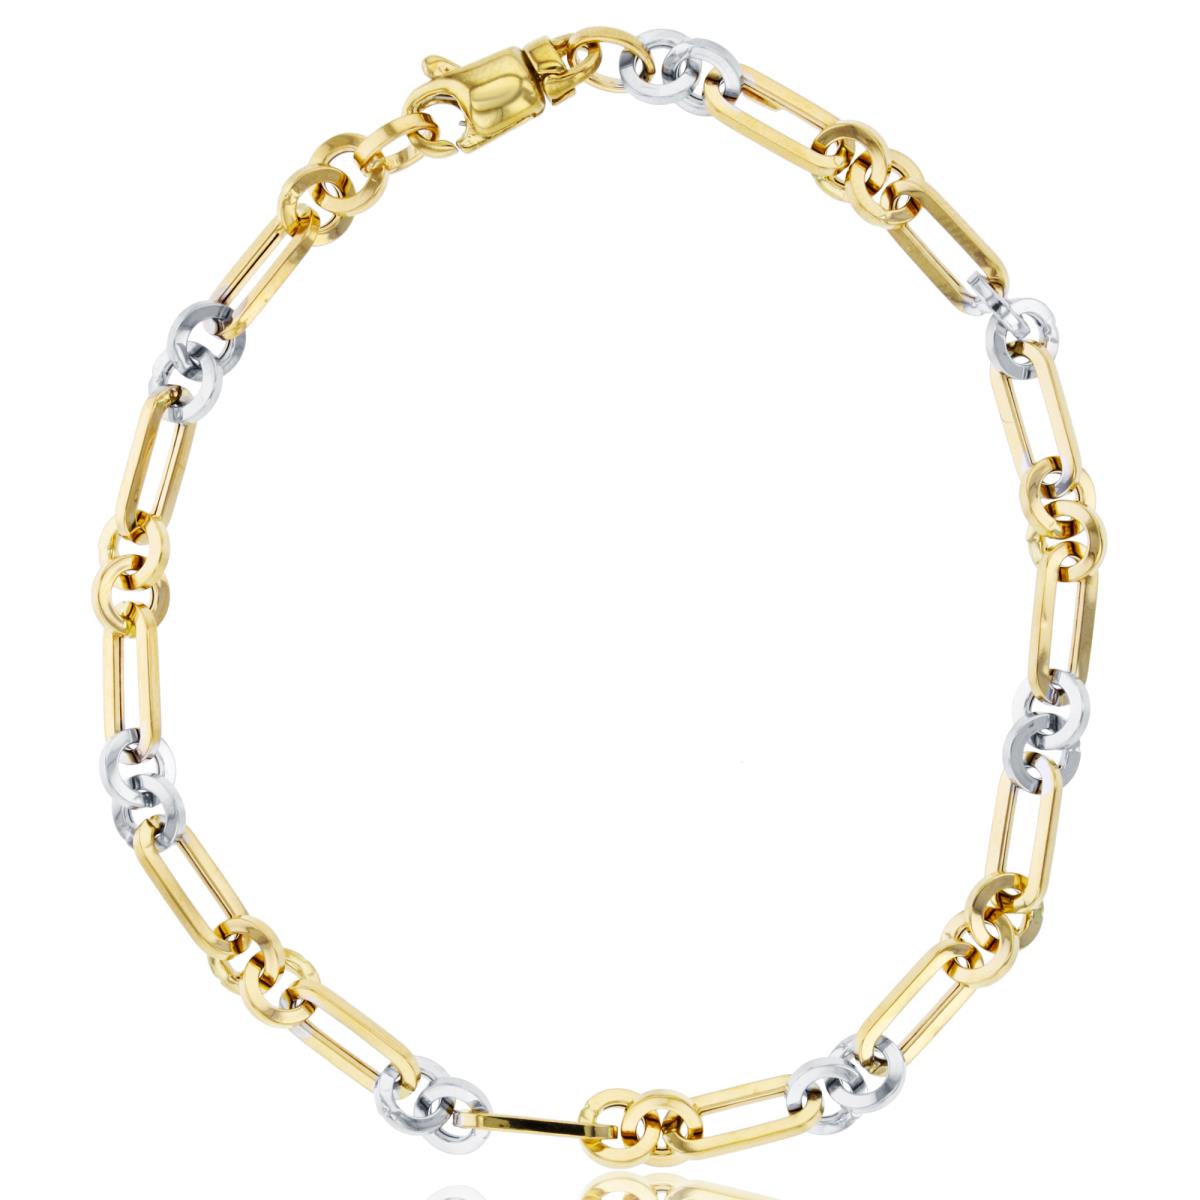 10K Two-Tone Gold Round & Oval Link 8.25" Chain Bracelet